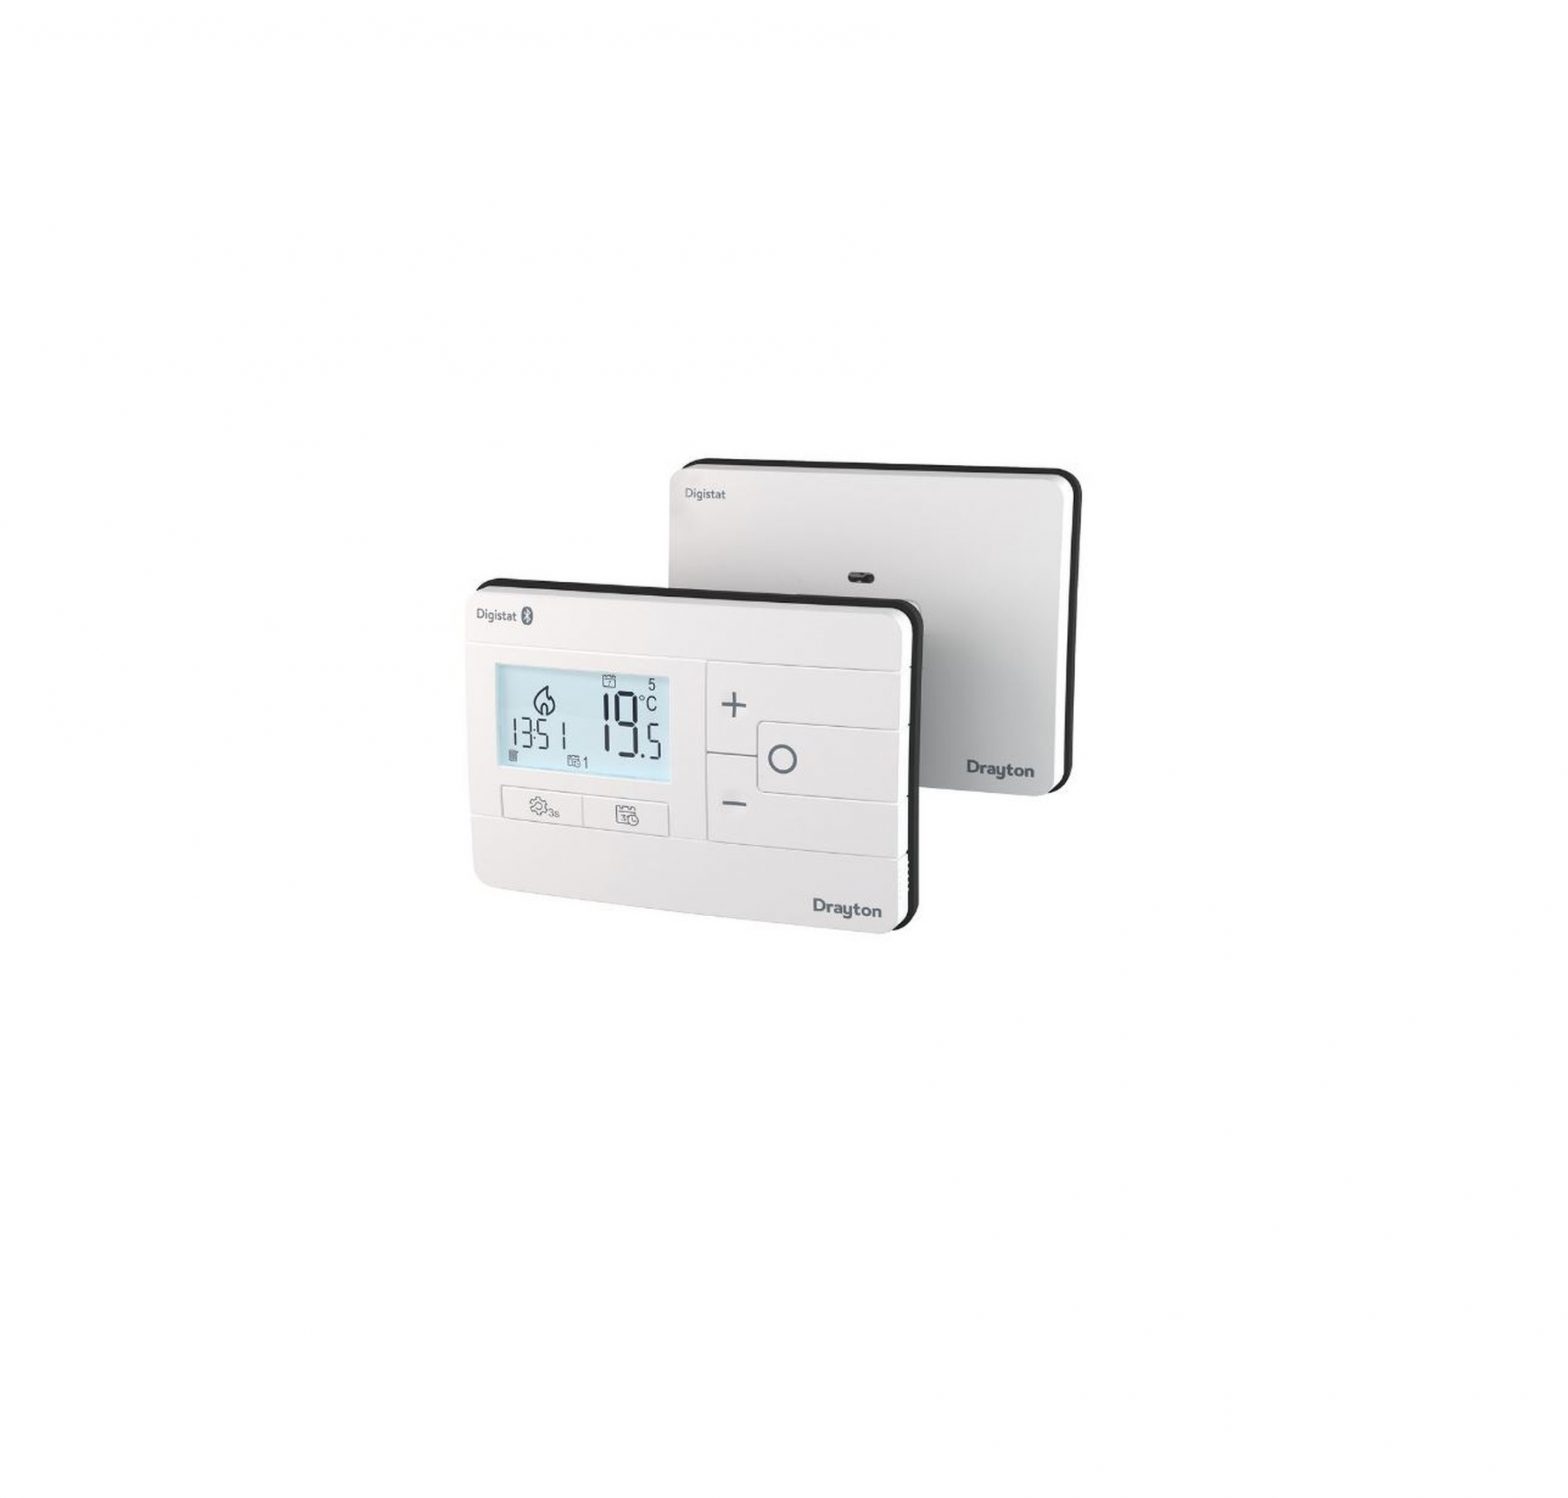 Drayton 2290M Programmable Room Thermostat Installation Guide